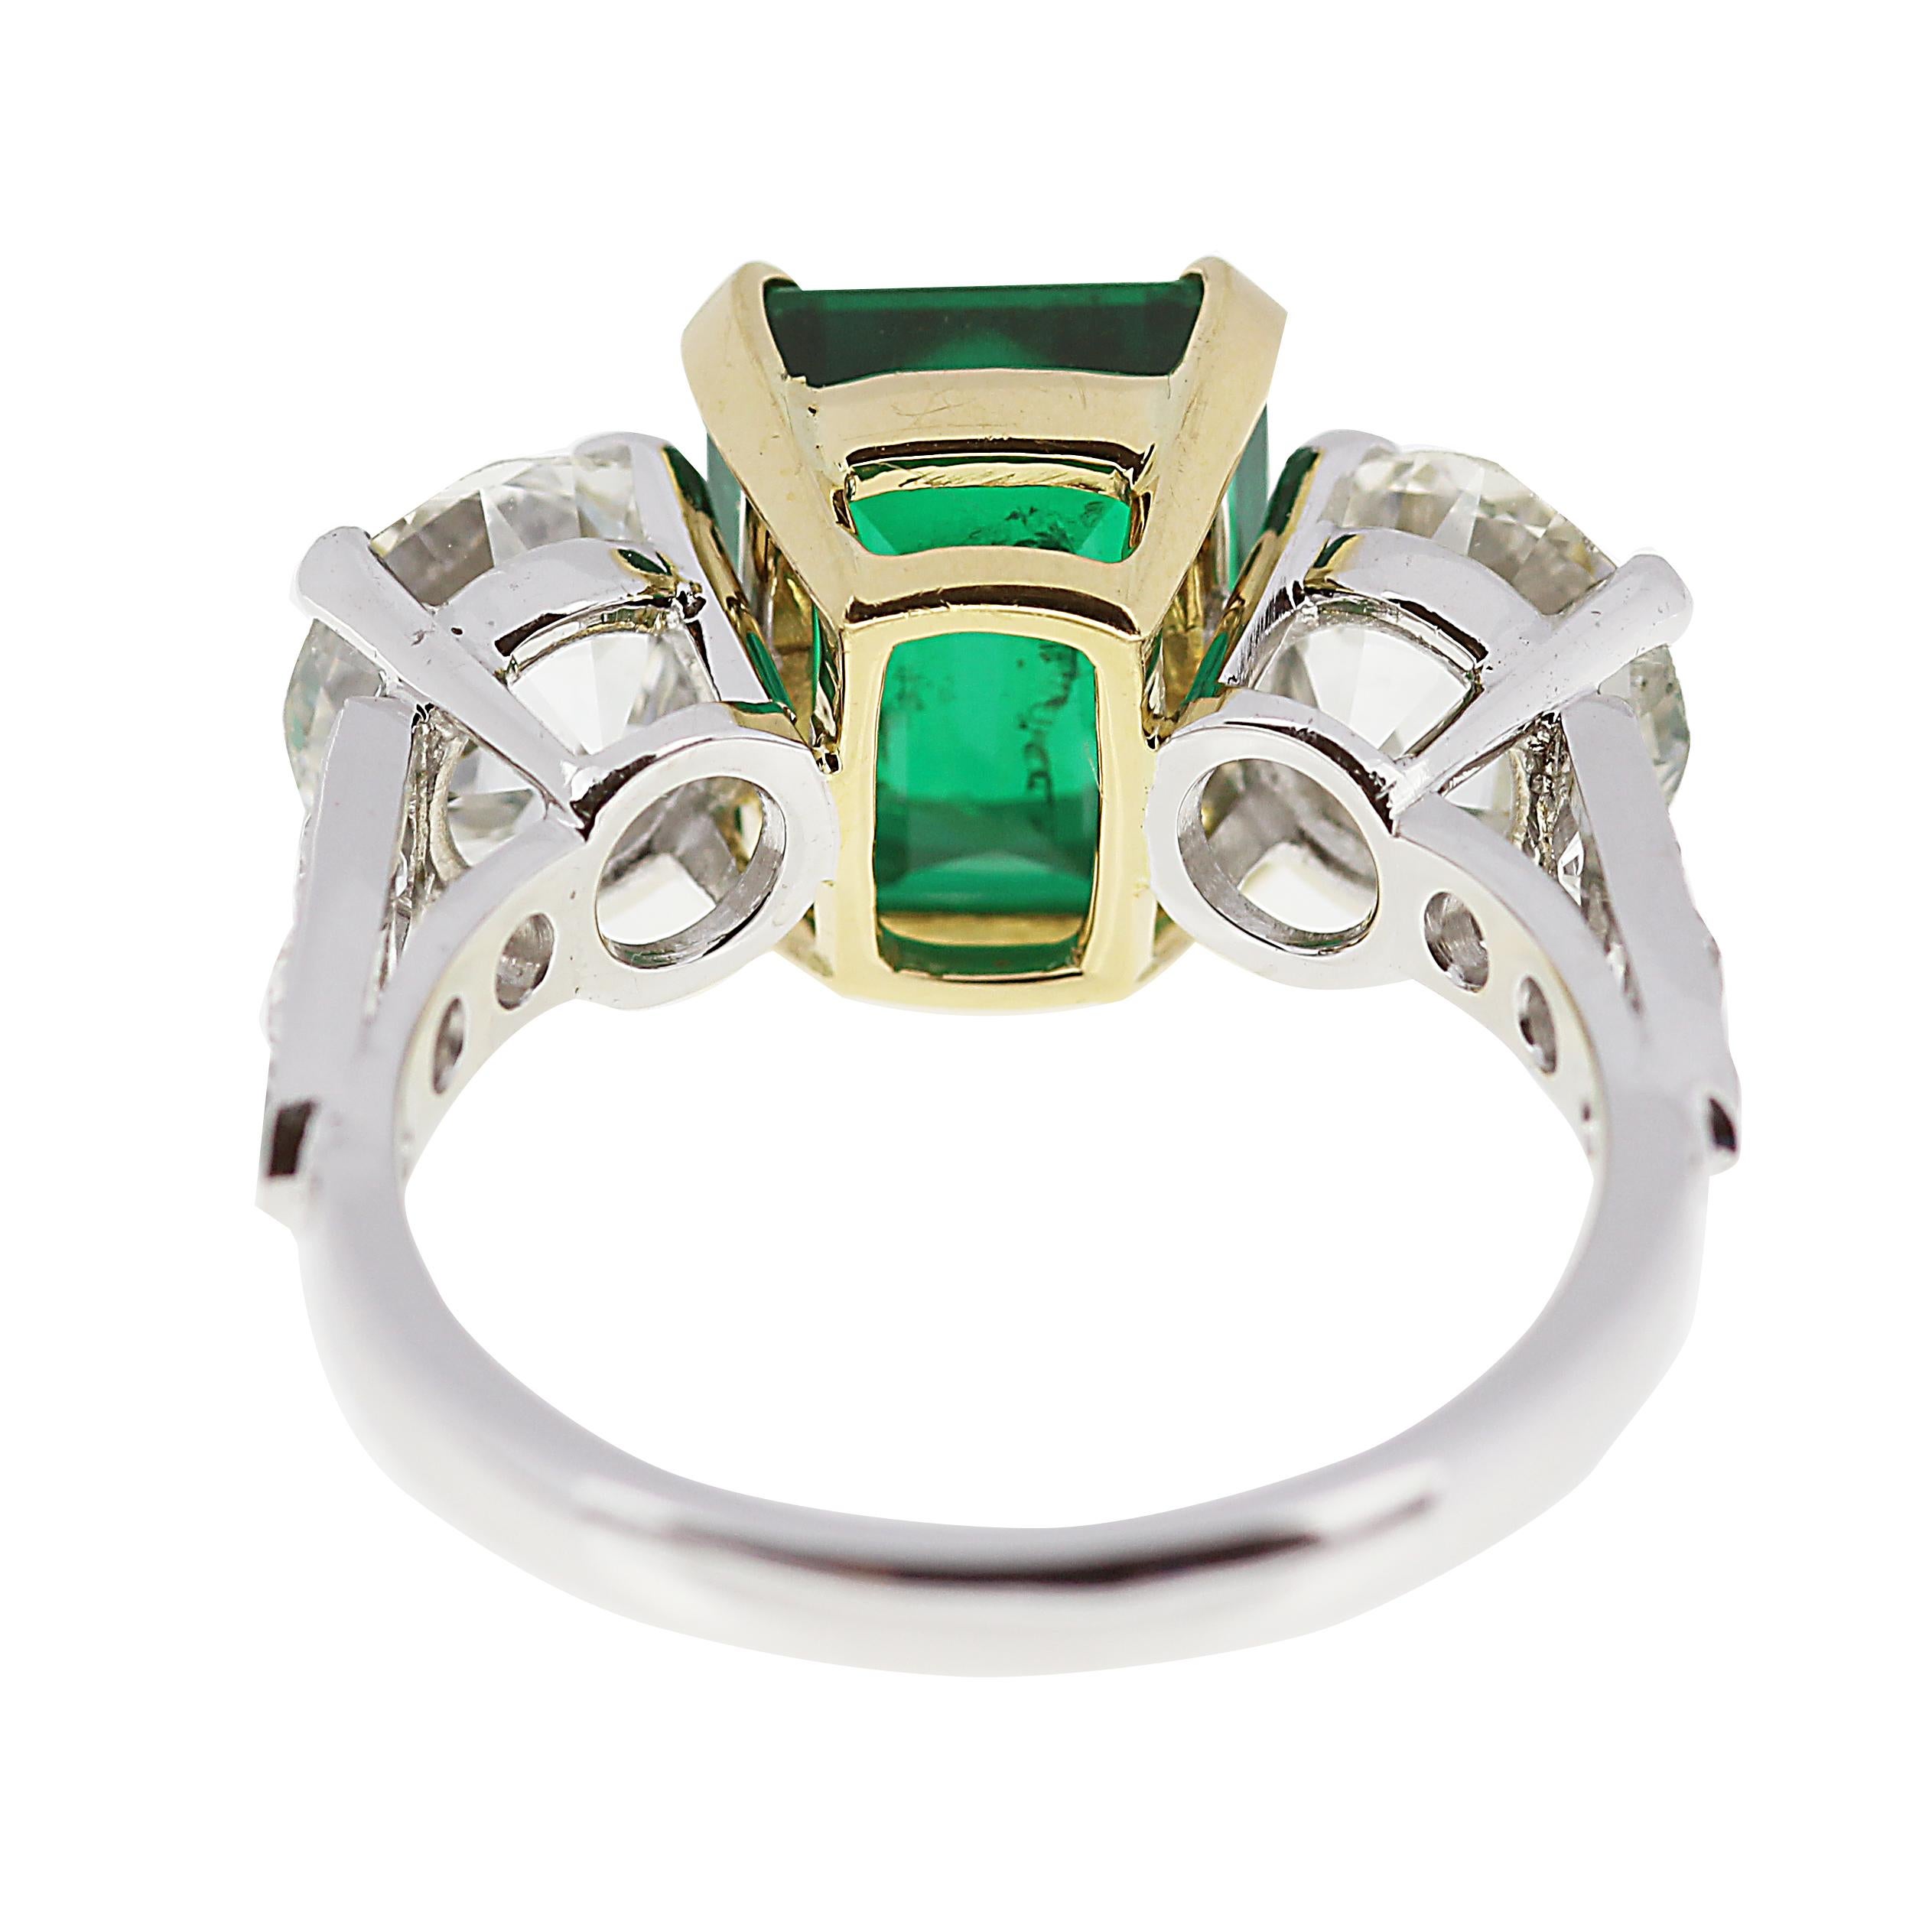 Emerald Cut Certified Colombian Emerald and Old European Cut Diamond Three-Stone Ring